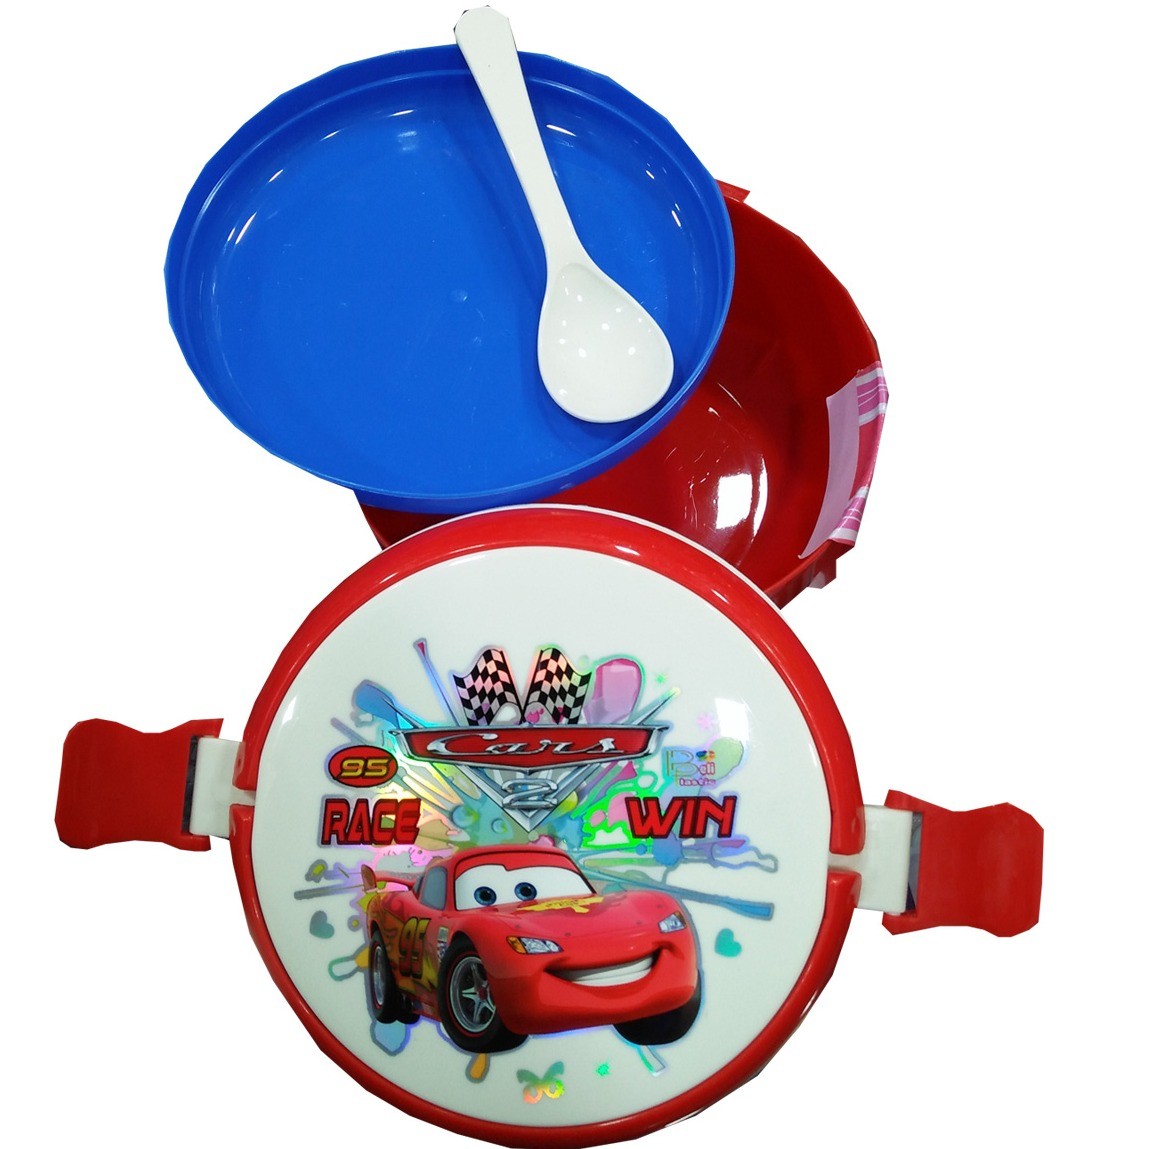 Car Racer Themed lunch box For Kids - Blue & Red